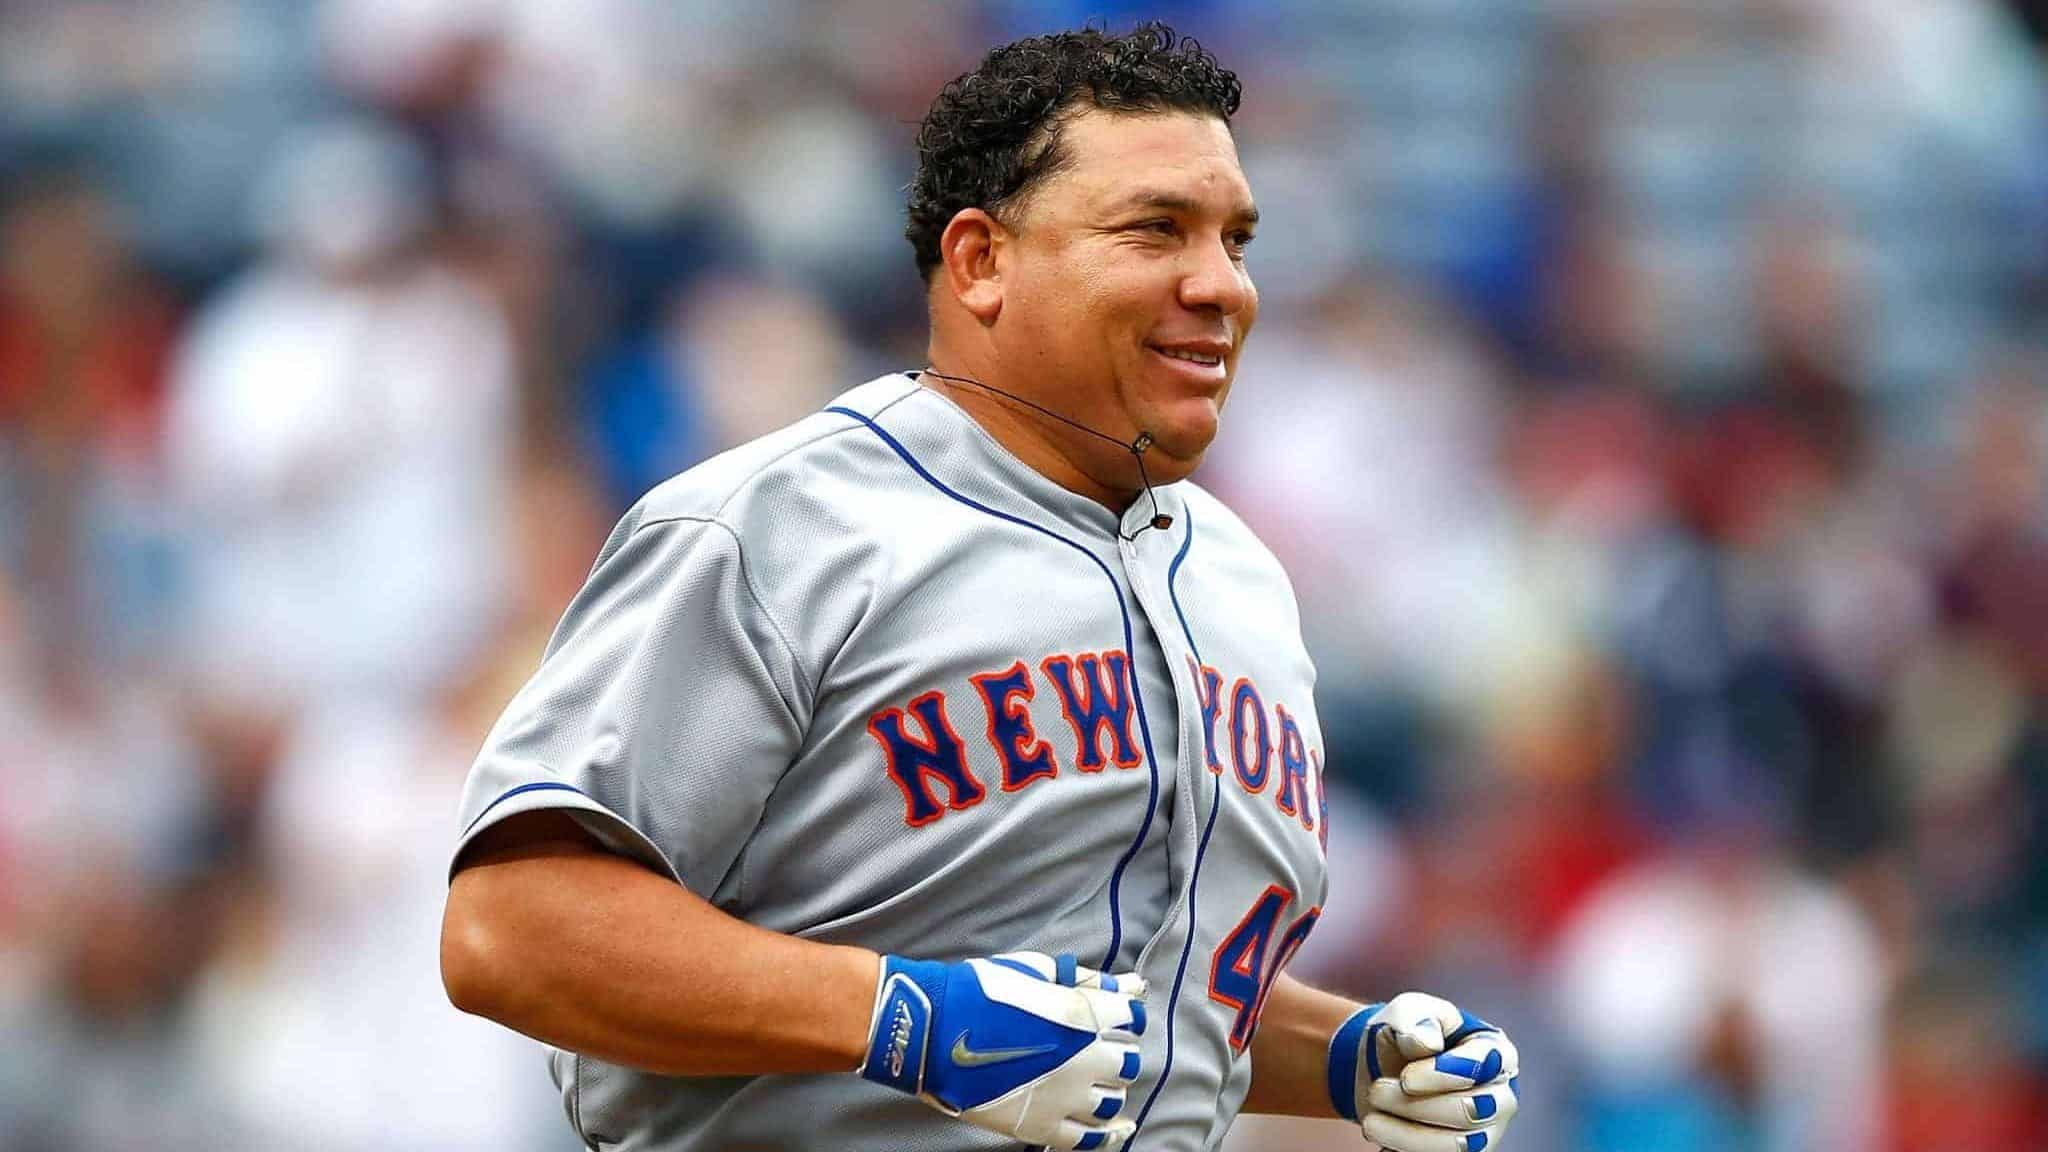 ATLANTA, GA - APRIL 12: Bartolo Colon #40 of the New York Mets runs to first base after hitting a RBI single into right field against the Atlanta Braves during the Braves opening series at Turner Field on April 12, 2015 in Atlanta, Georgia. Wilmer Flores #4 scored on the single.